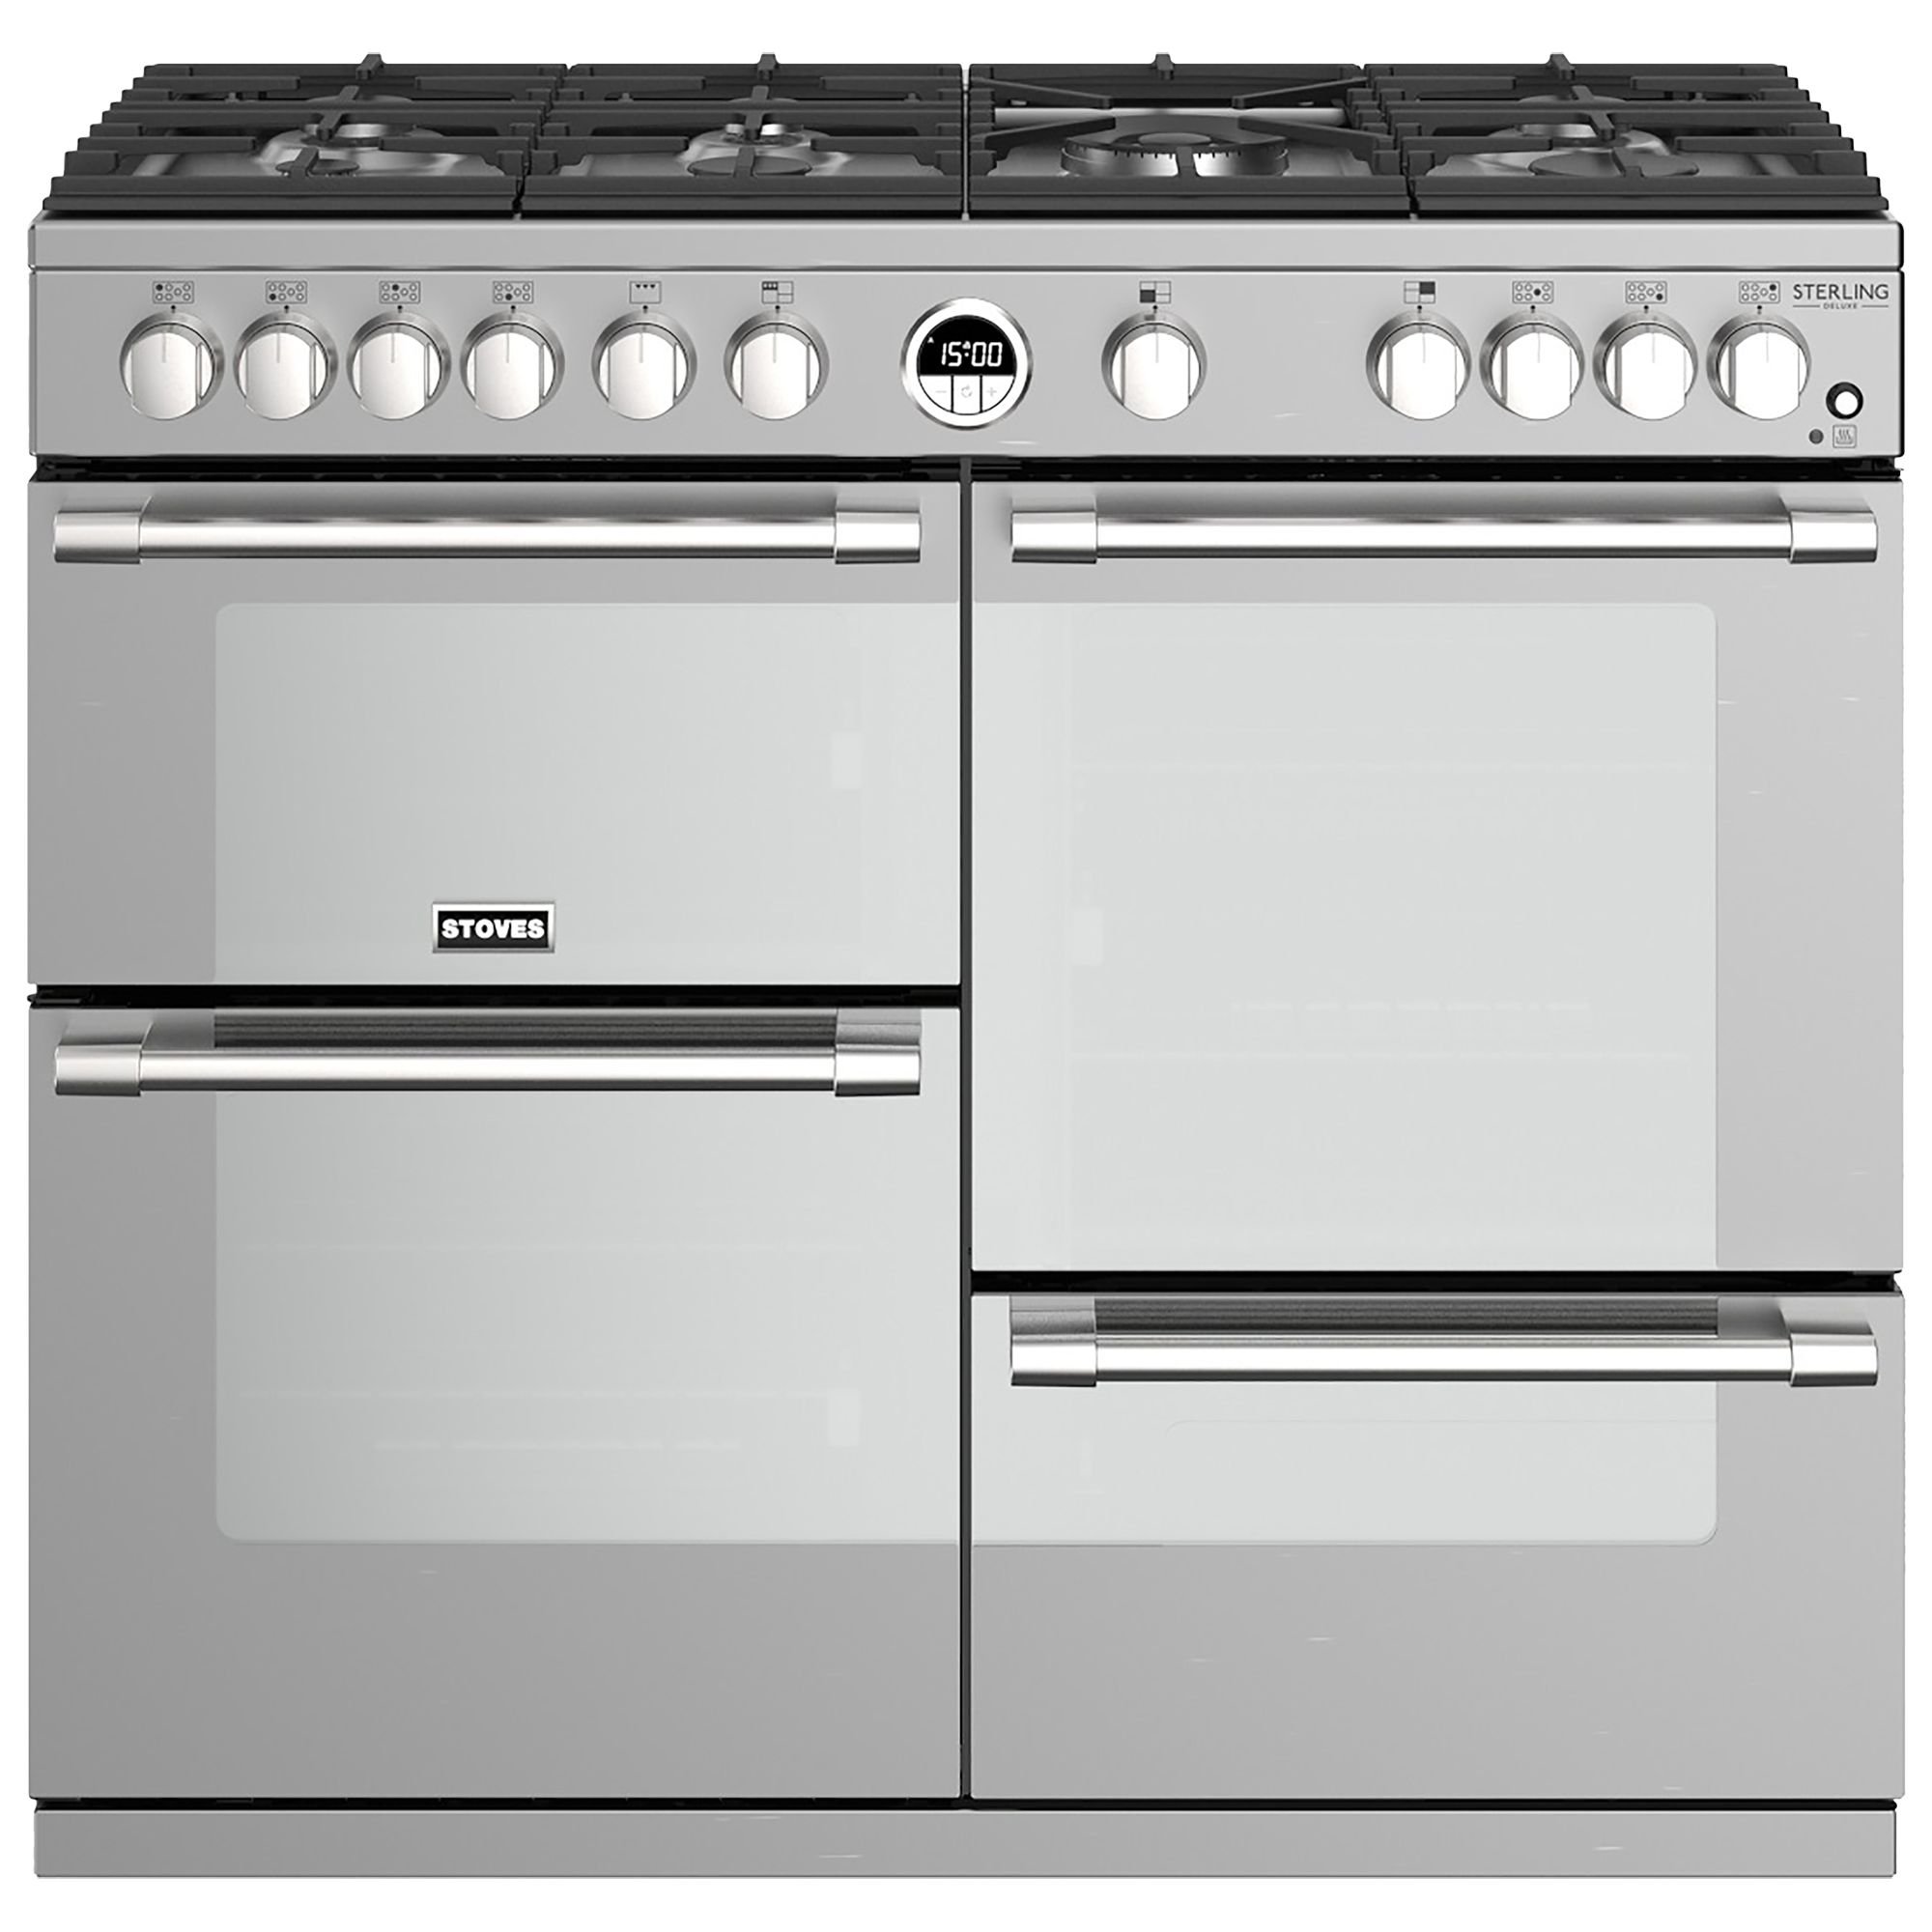 Sterling Deluxe S1000G Conventional Gas Oven & Electric Grill Range Cooker